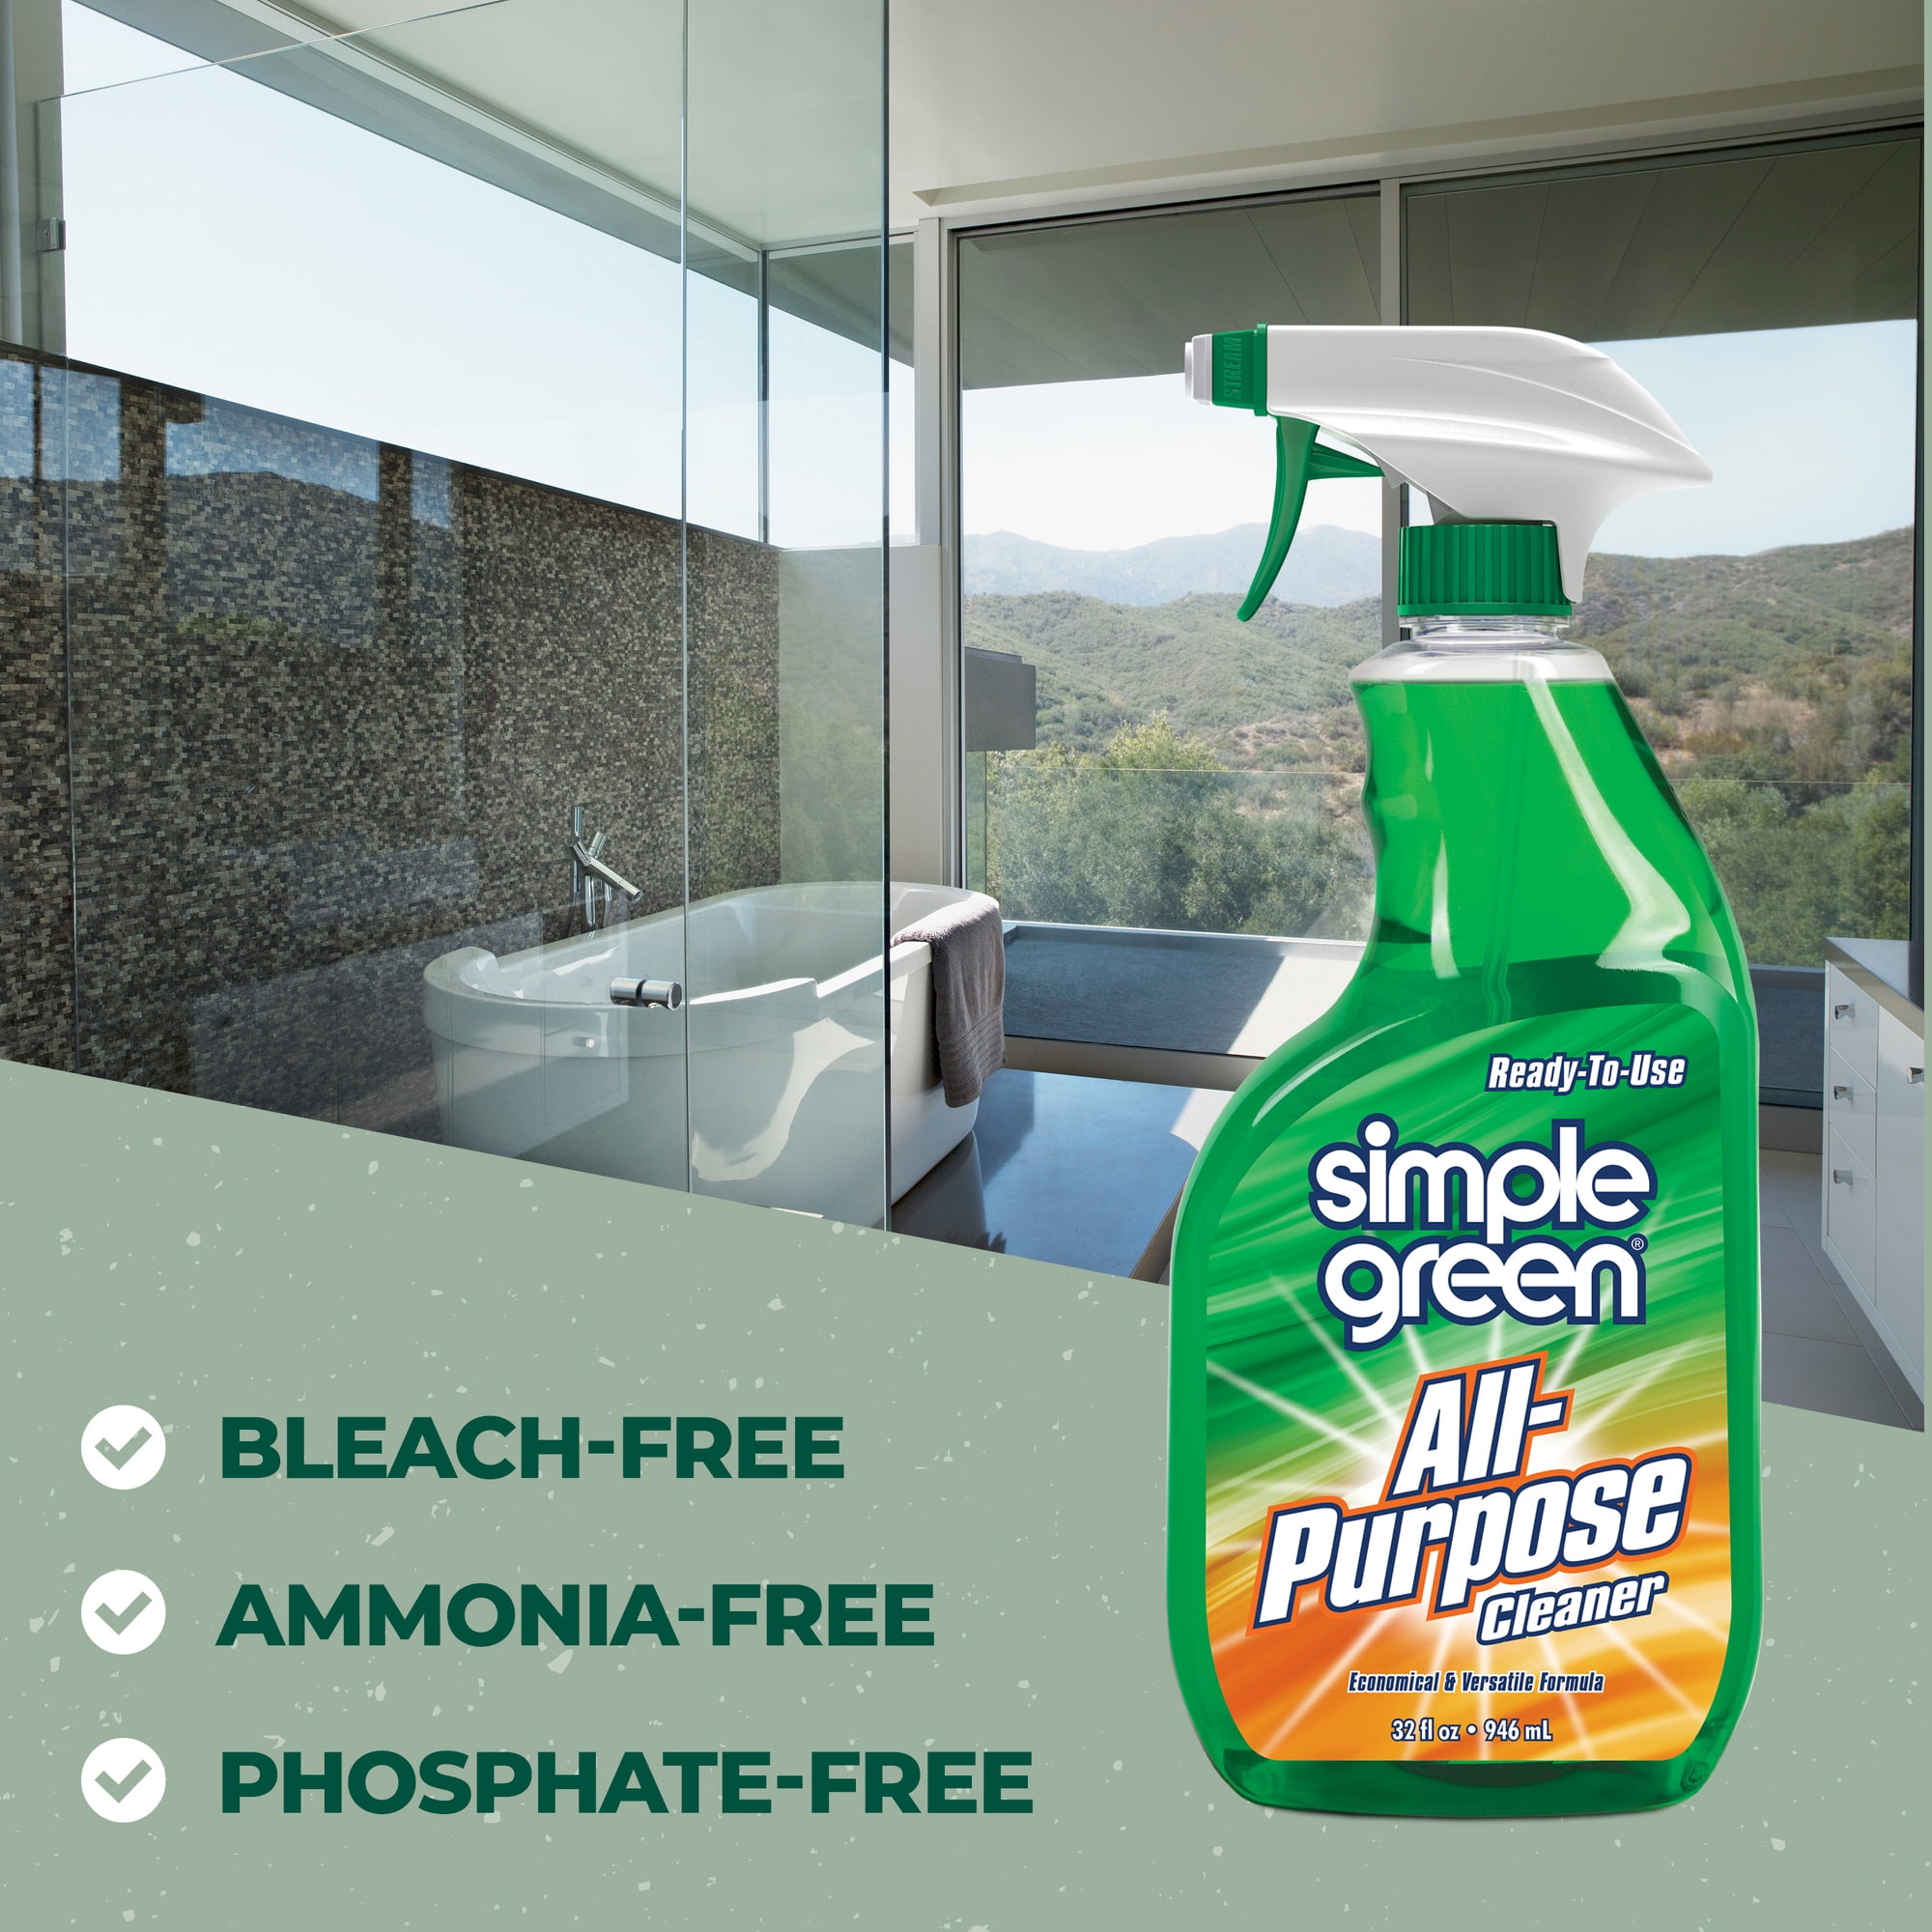 Simple Green Ready-to-Use 32-fl oz Pump Spray Glass Cleaner in the